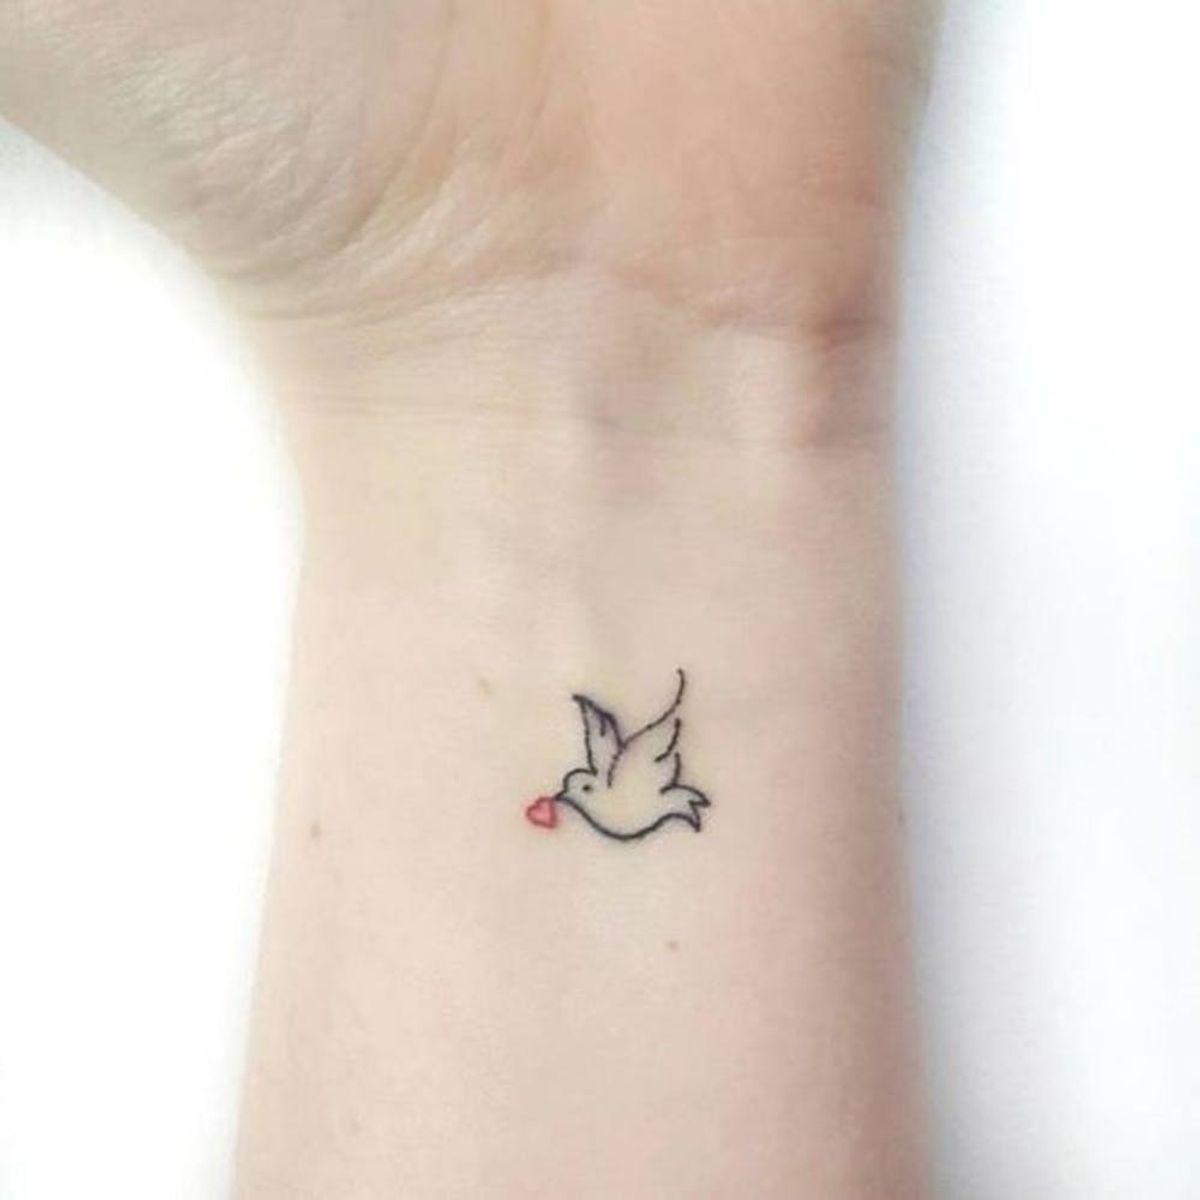 10 Adorable Animal Tattoos That Will Inspire You to Get Inked